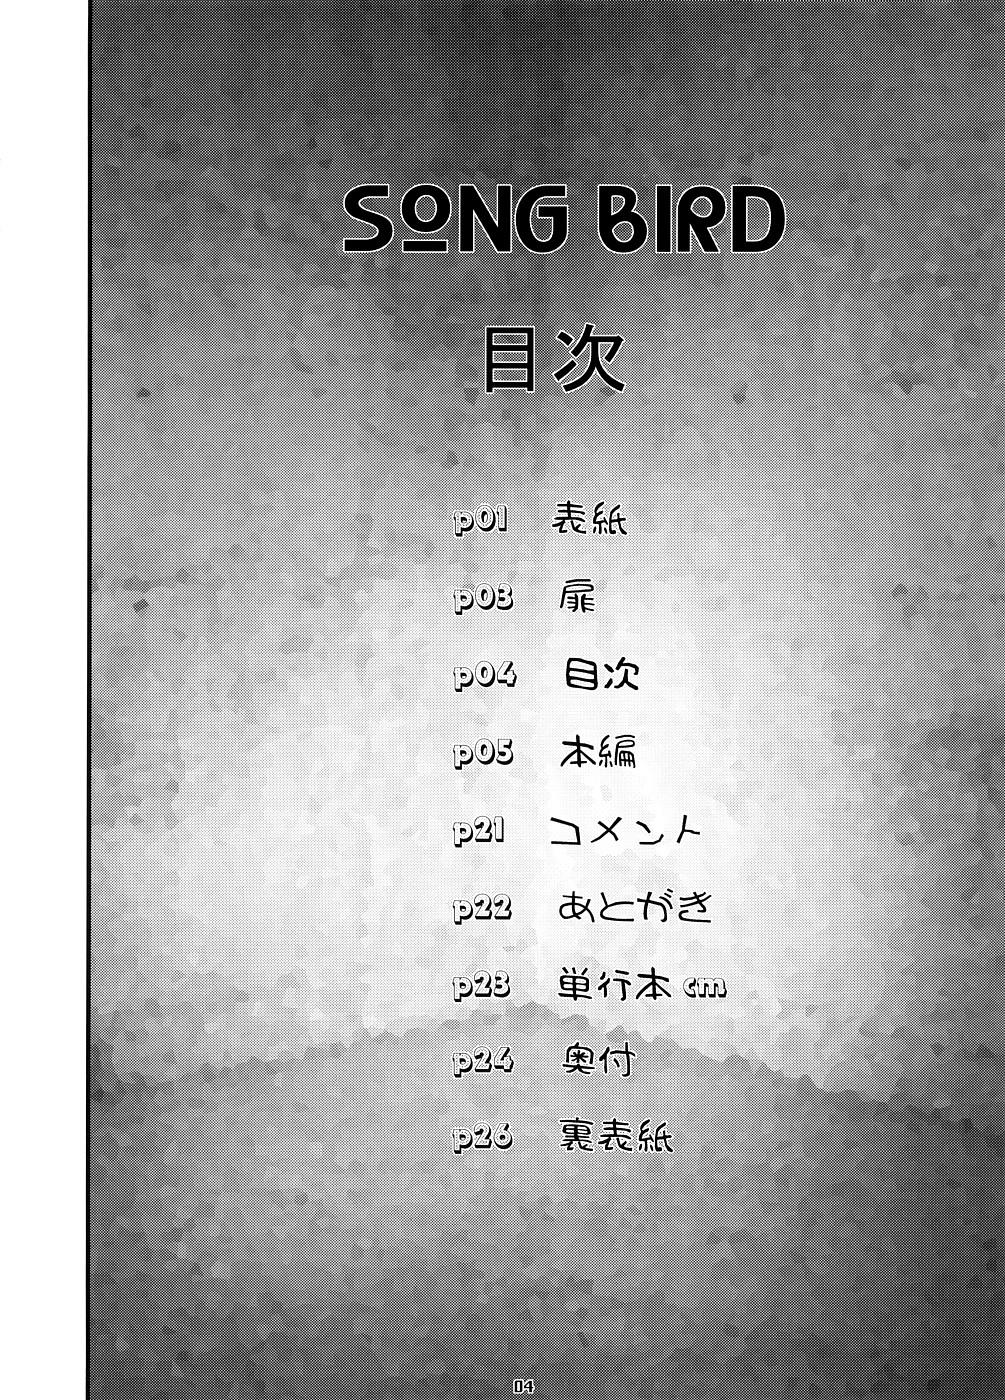 Hard Cock Song Bird - Macross frontier Tiny - Page 3